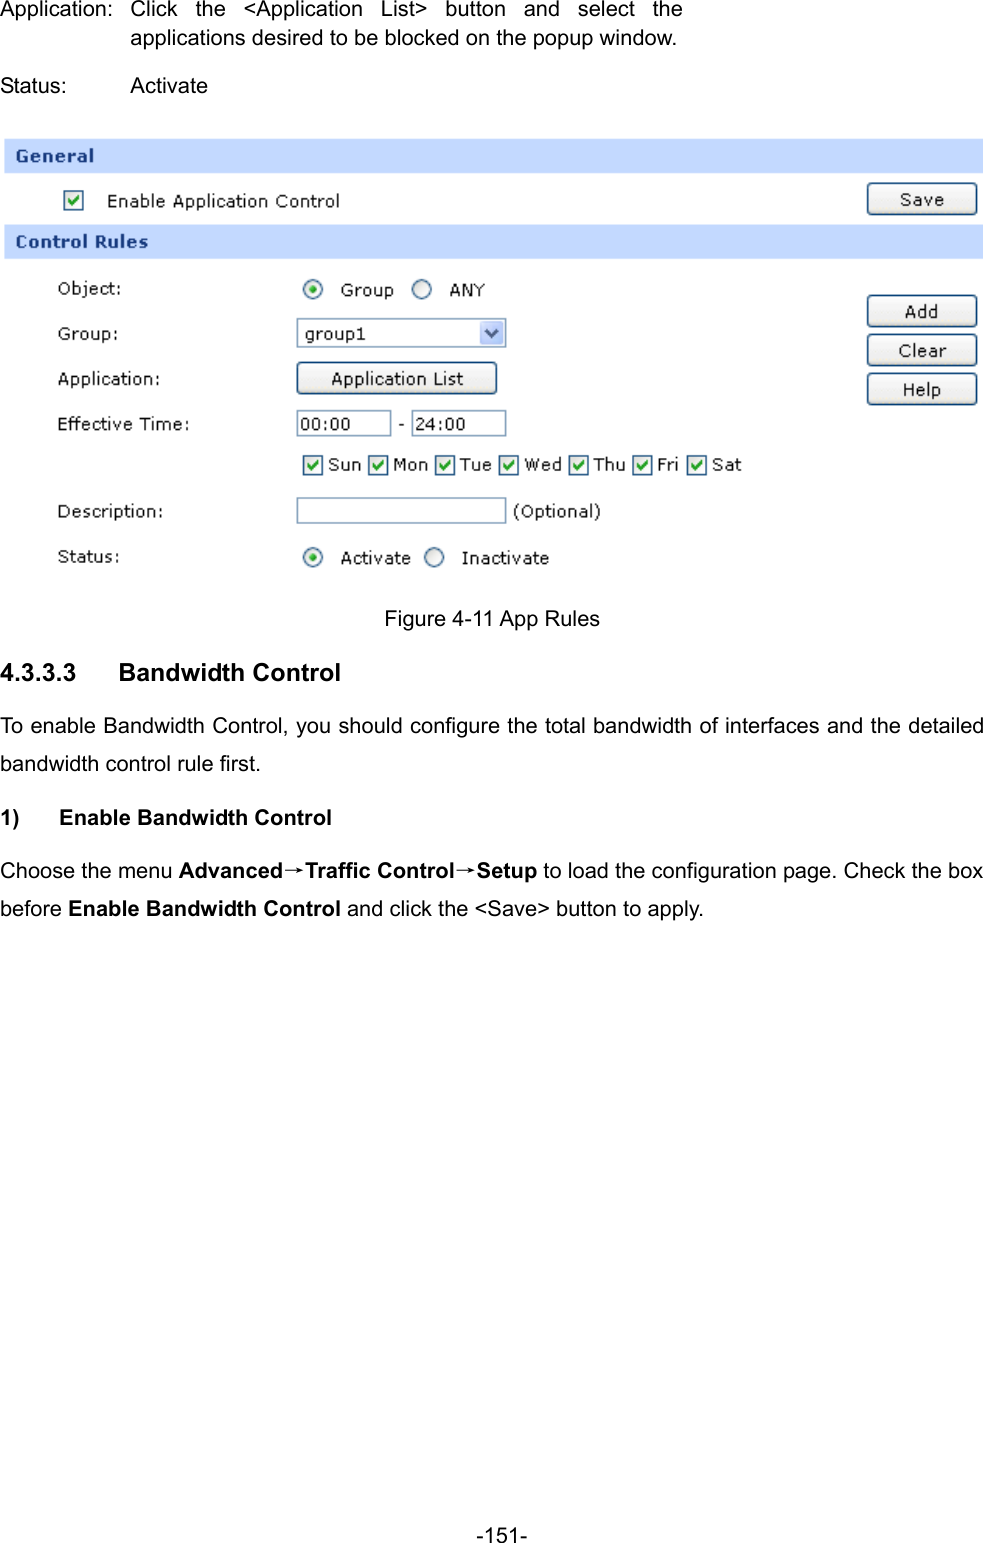  -151- Application: Click the &lt;Application List&gt; button and select the applications desired to be blocked on the popup window.Status: Activate  Figure 4-11 App Rules 4.3.3.3  Bandwidth Control   To enable Bandwidth Control, you should configure the total bandwidth of interfaces and the detailed bandwidth control rule first. 1)  Enable Bandwidth Control Choose the menu Advanced→Traffic Control→Setup to load the configuration page. Check the box before Enable Bandwidth Control and click the &lt;Save&gt; button to apply. 